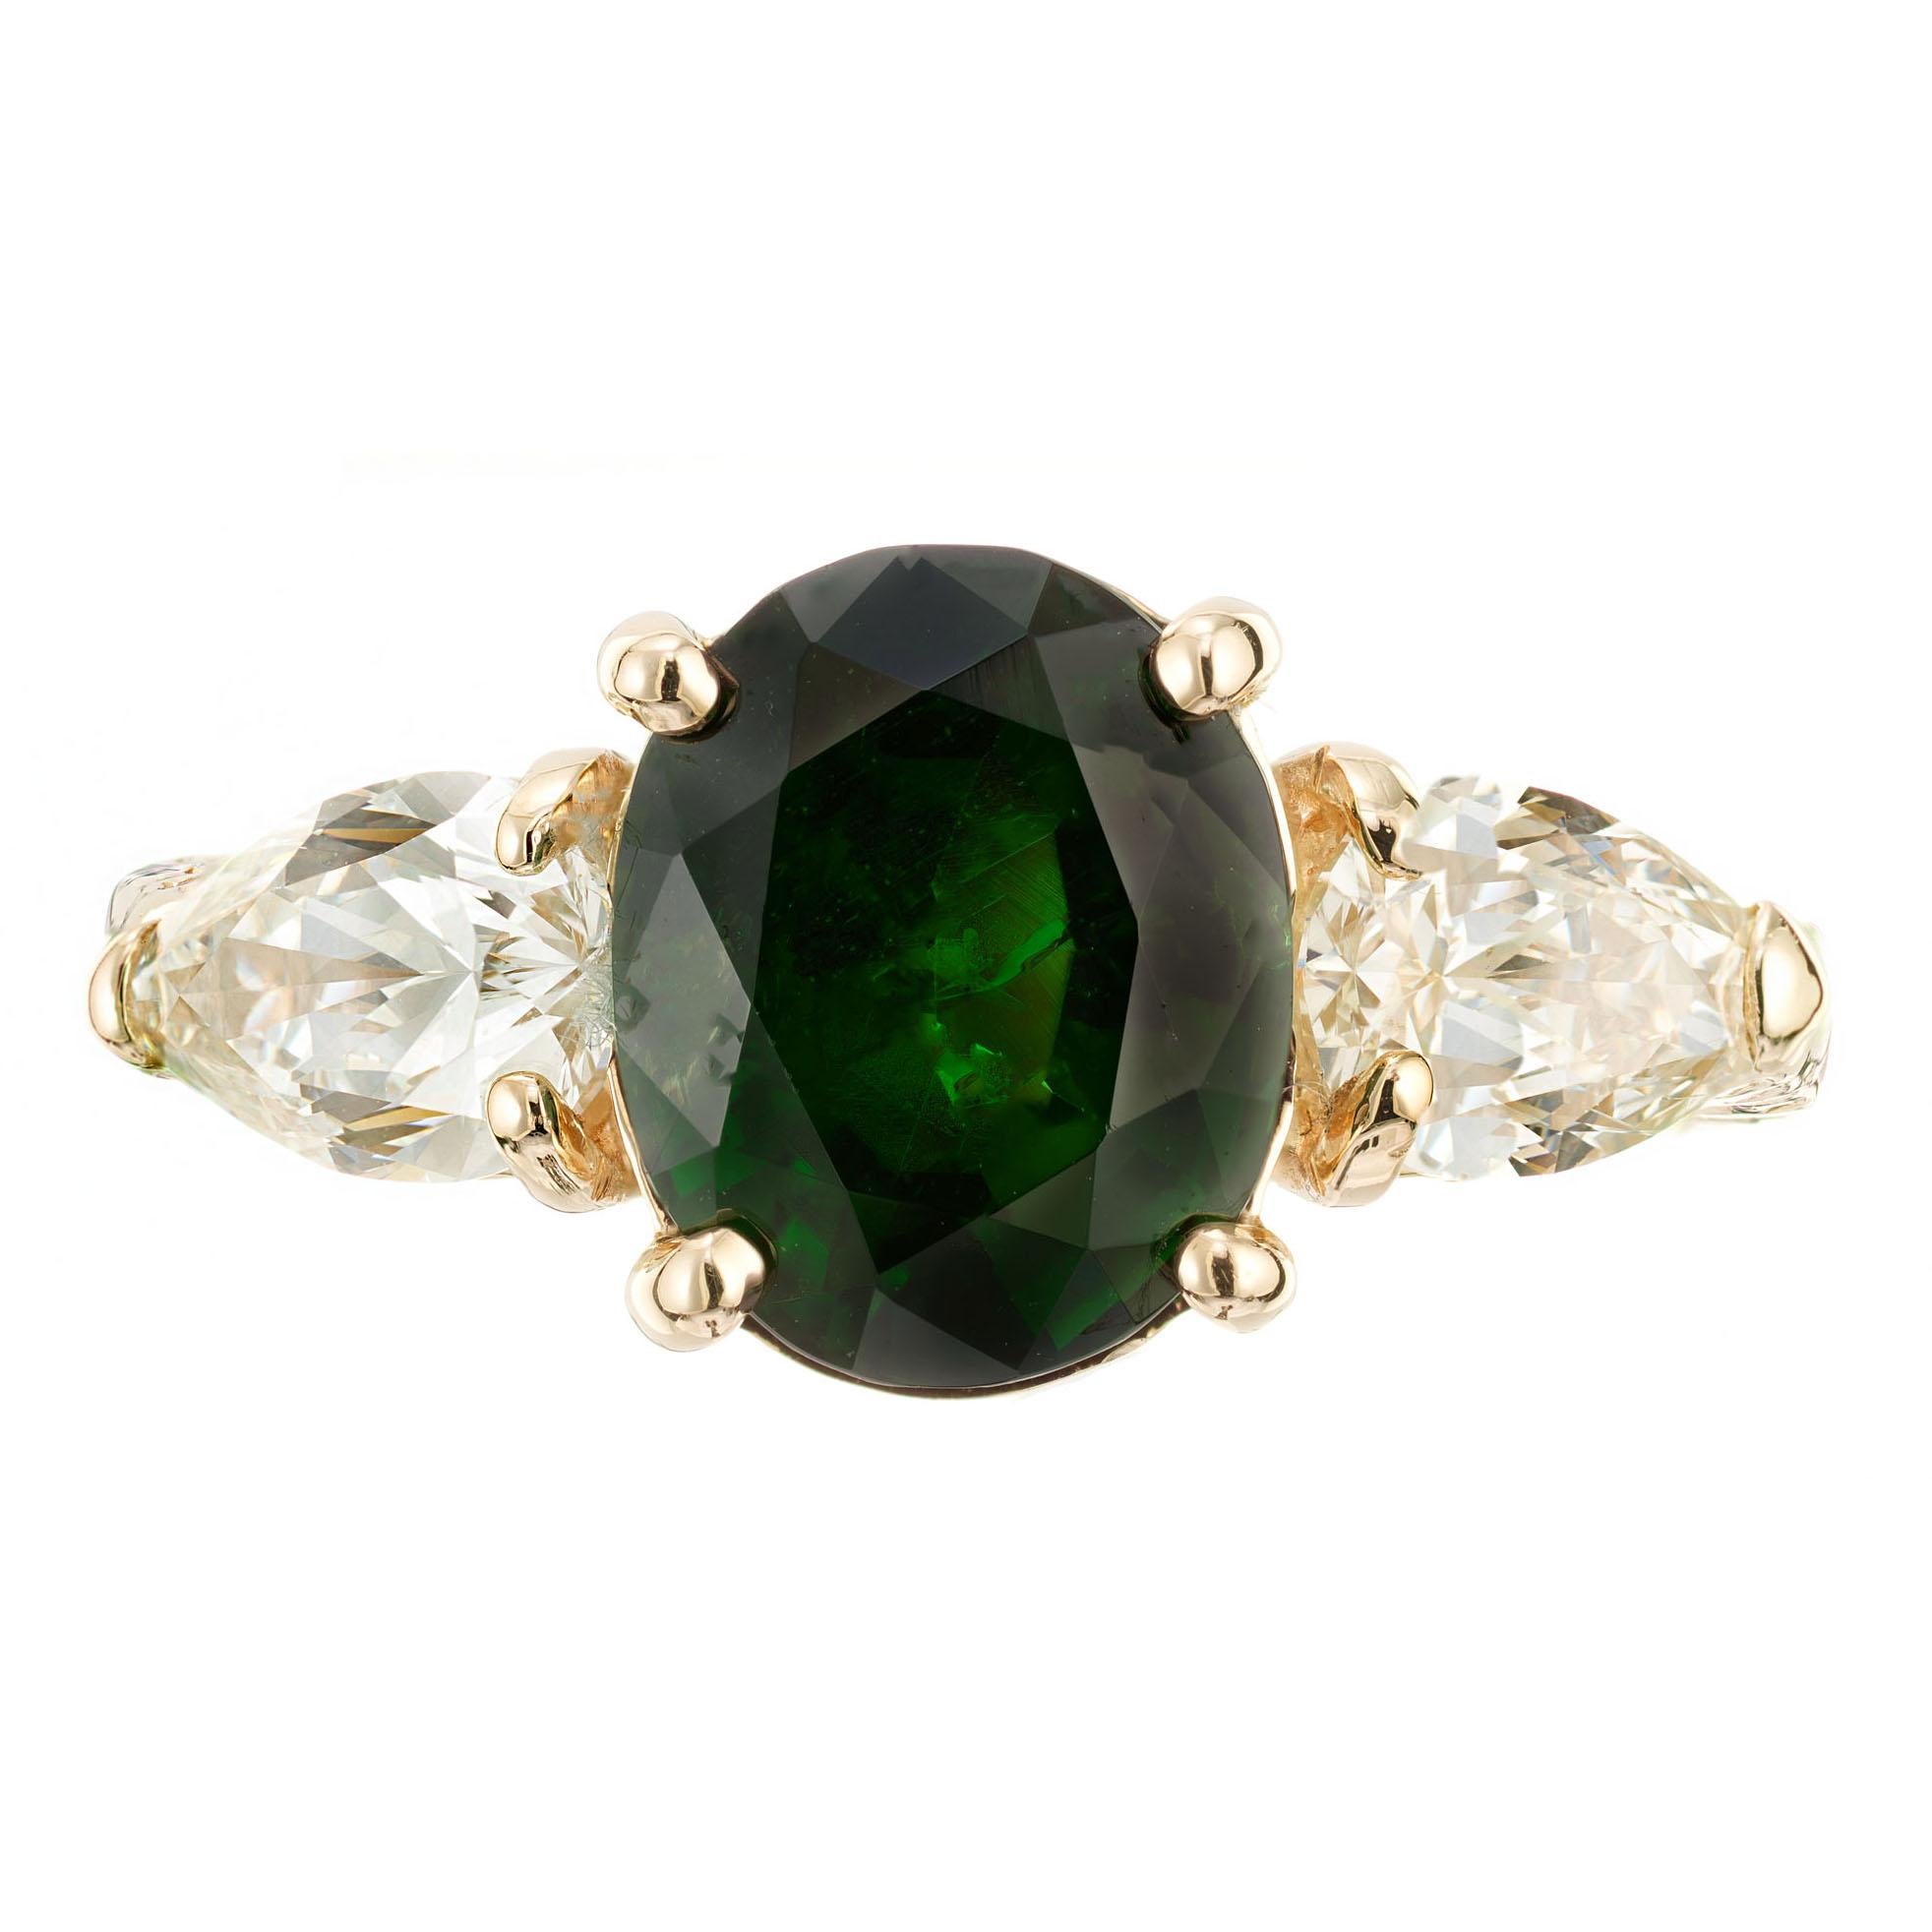 4.28ct Tsavorite Garnet and diamond engagement ring. AGL certified oval Tsavorite center stone with 2 pear shaped side diamonds in a 14k yellow gold open work setting with and engraved shank. Circa 1960-1970

1 oval bright gem green natural